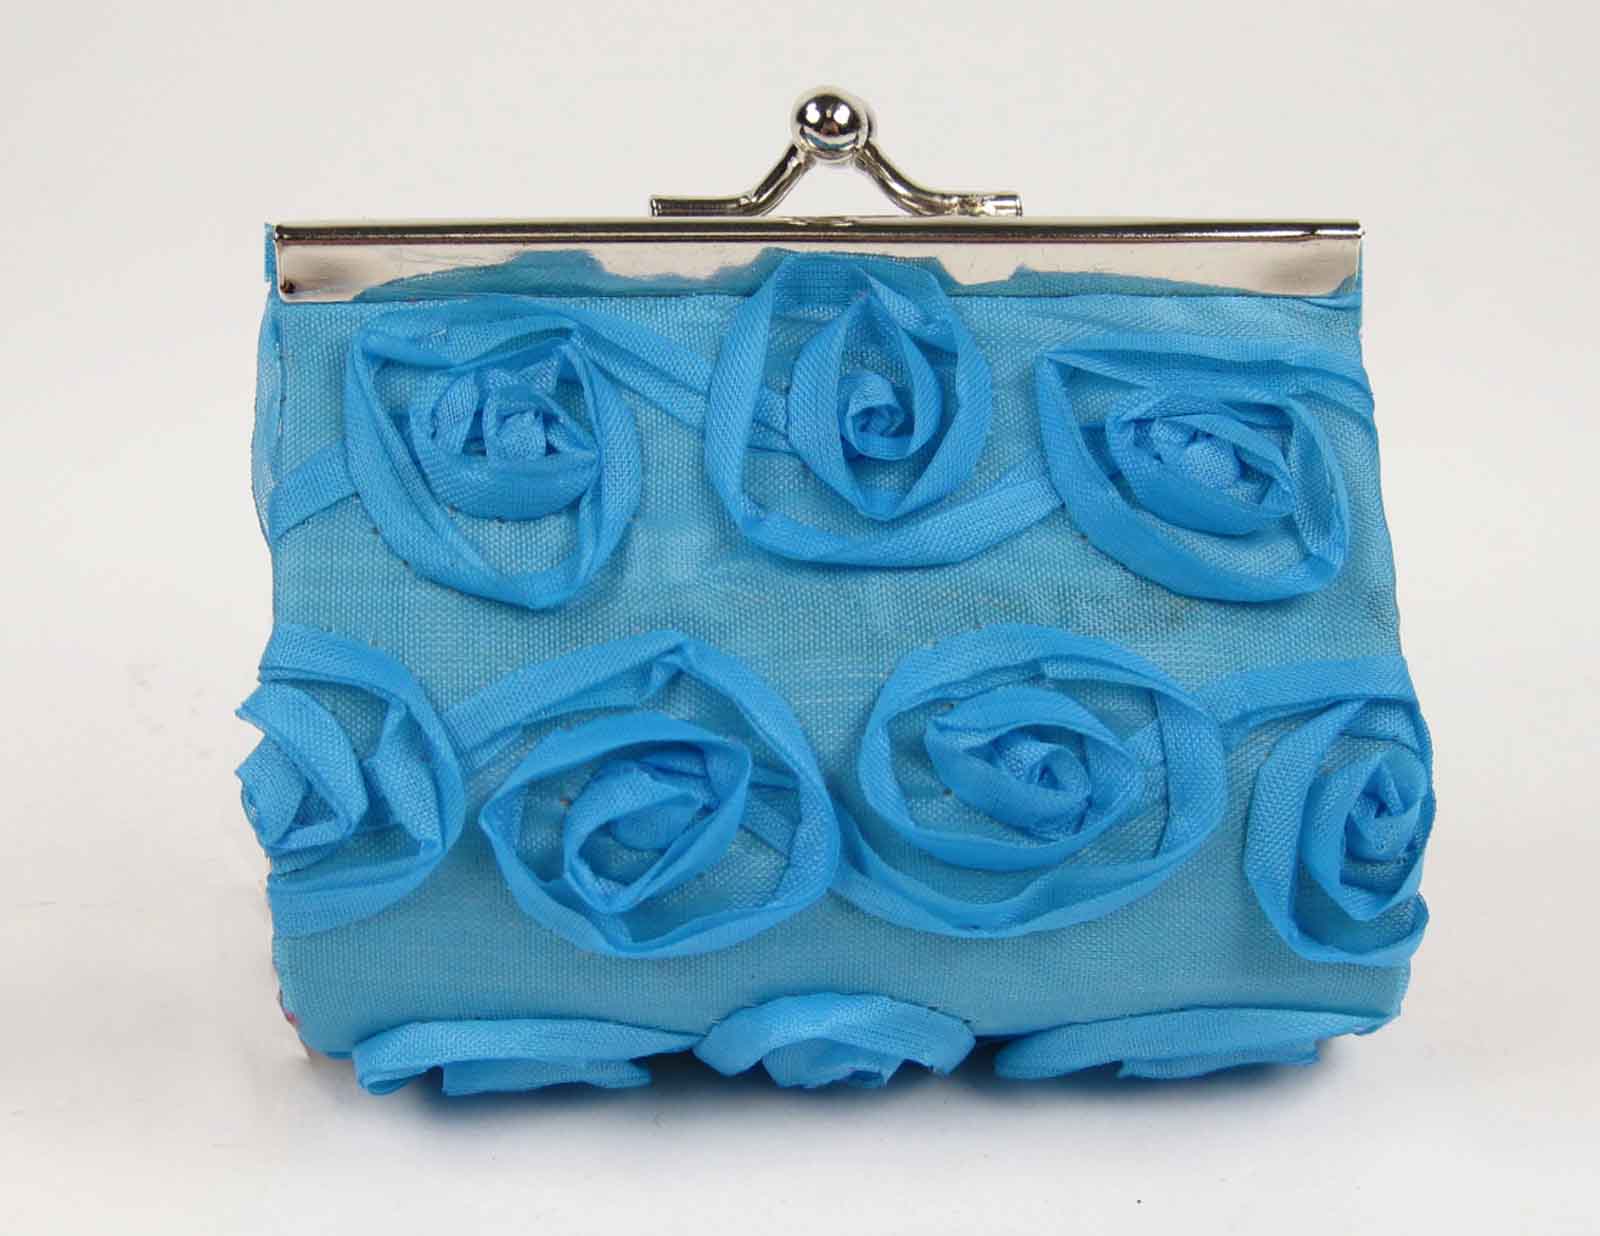 Floral Flower Coin Purse Kisslock Blue Women Change Small Gift Stocking Teen New